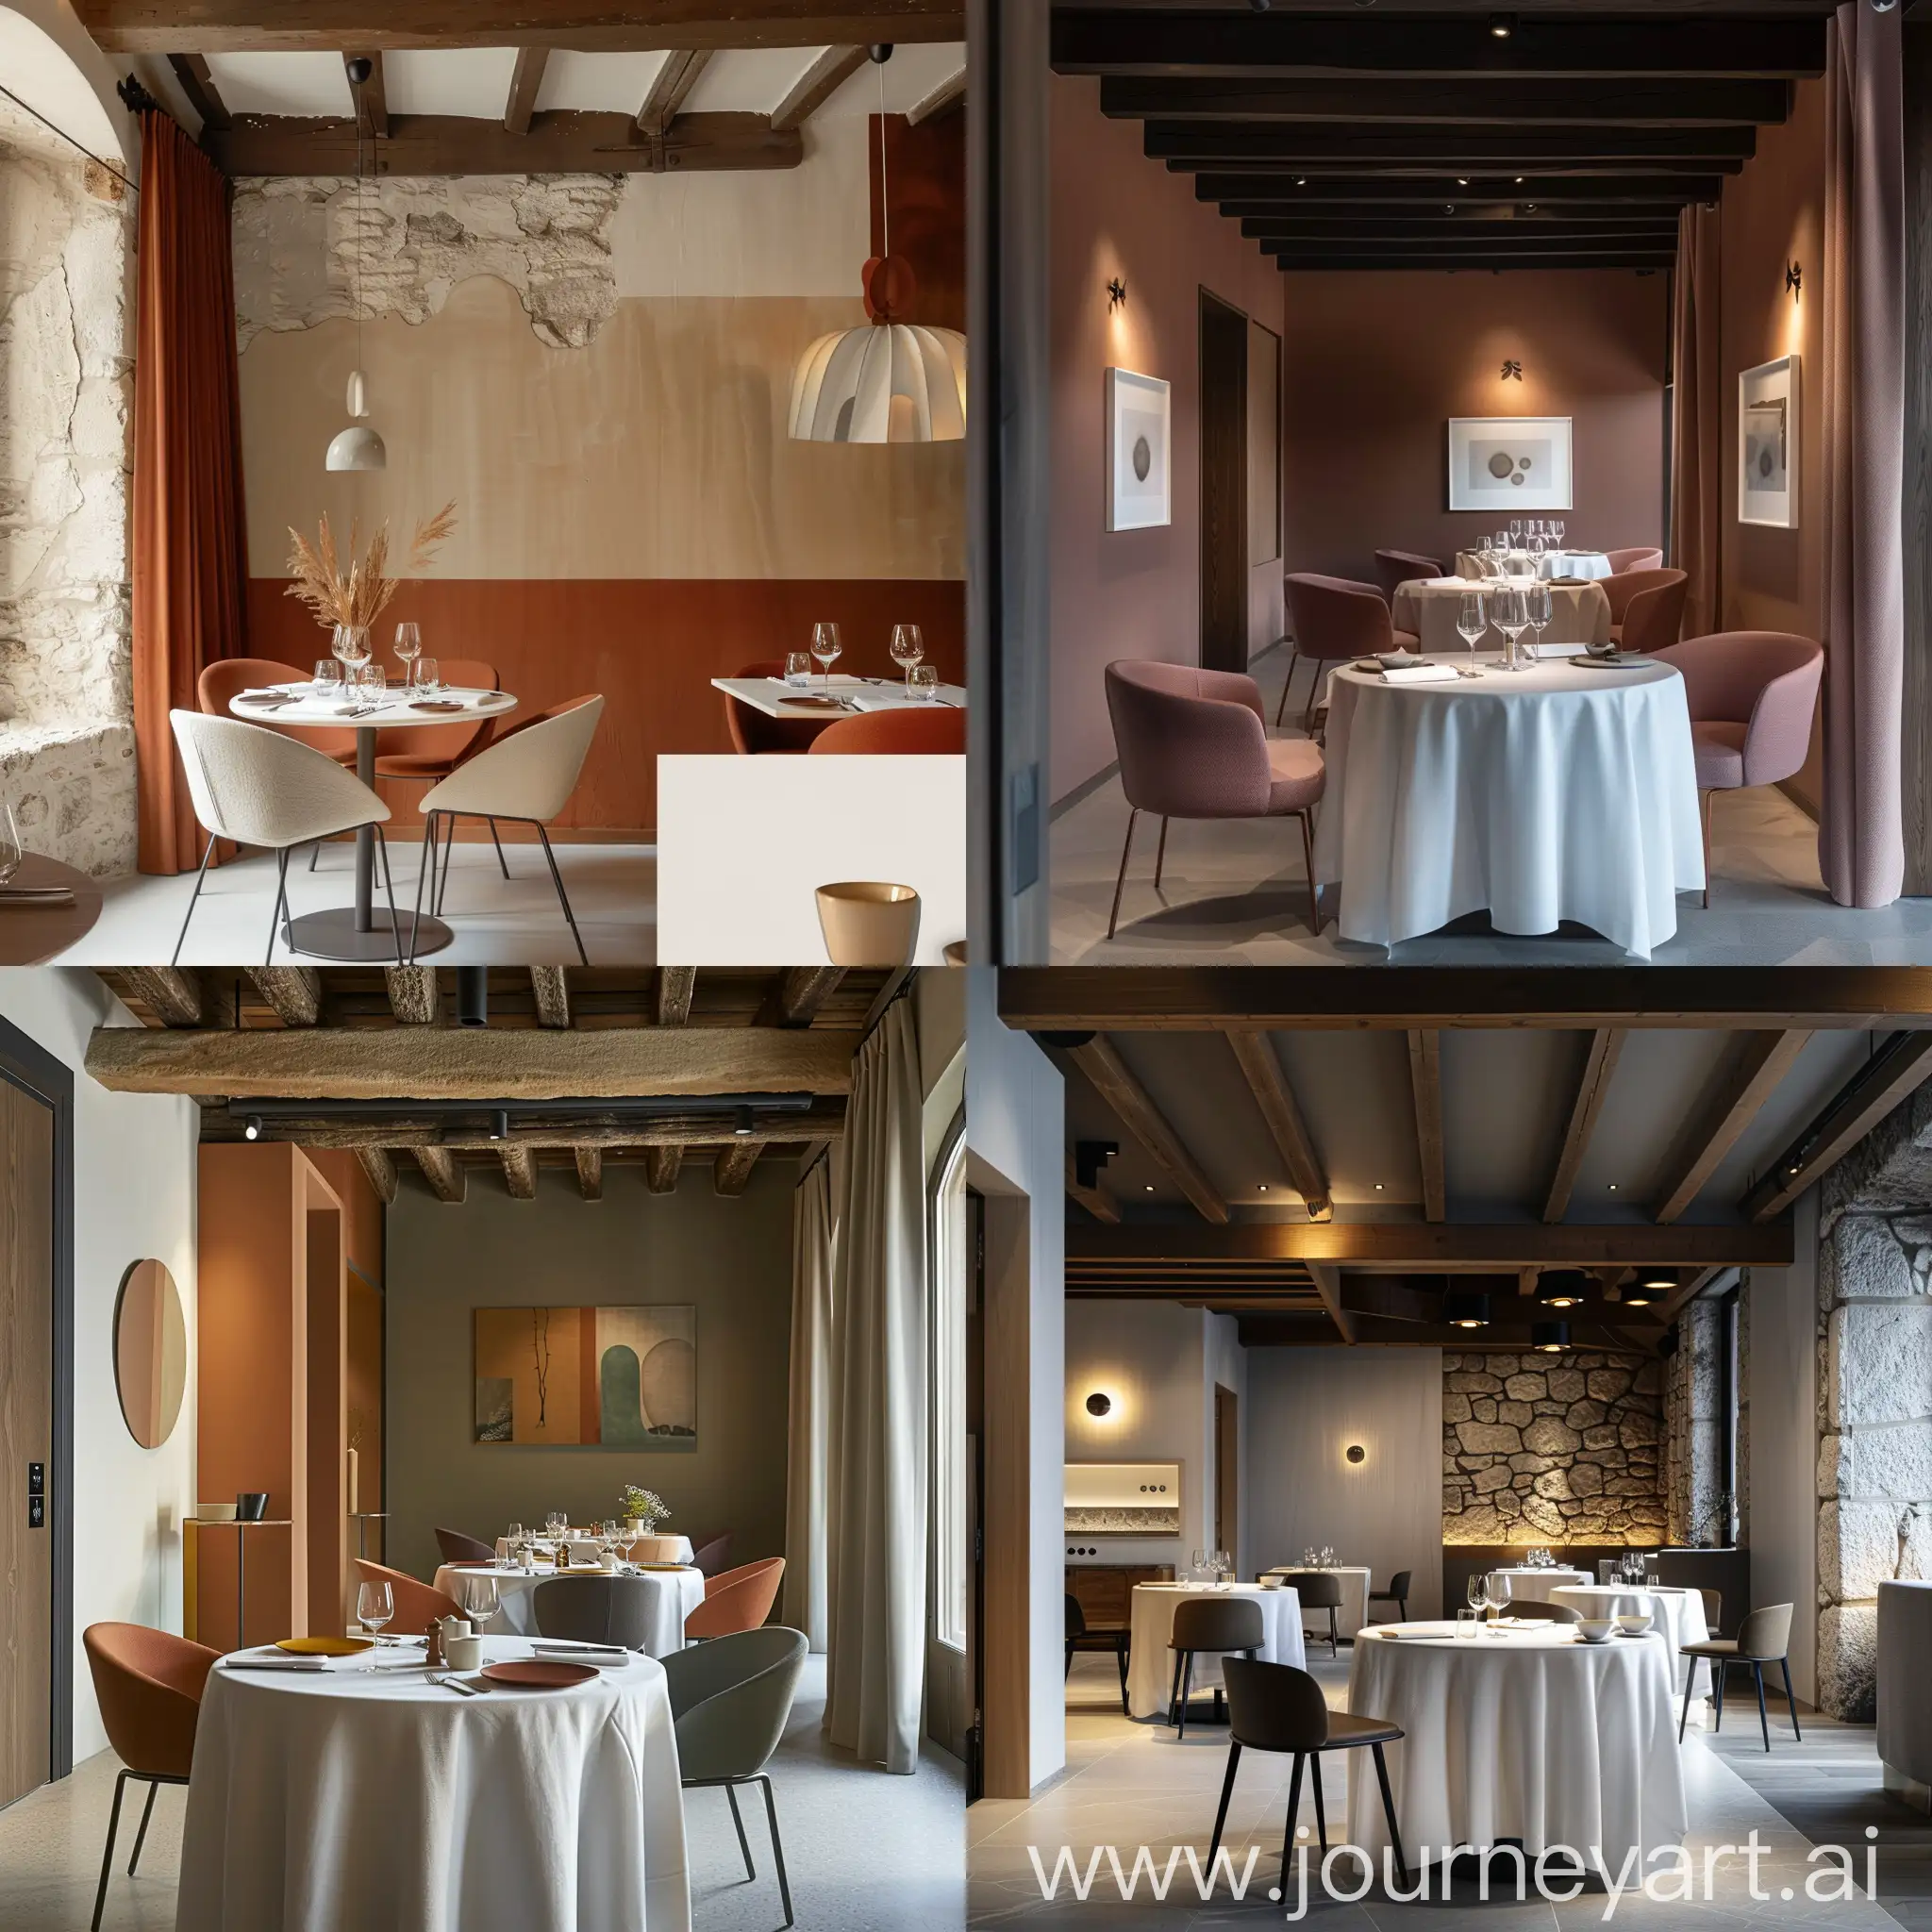 Rustic-Elegance-Norestense-Restaurant-Infused-with-Vibrant-Regional-Colors